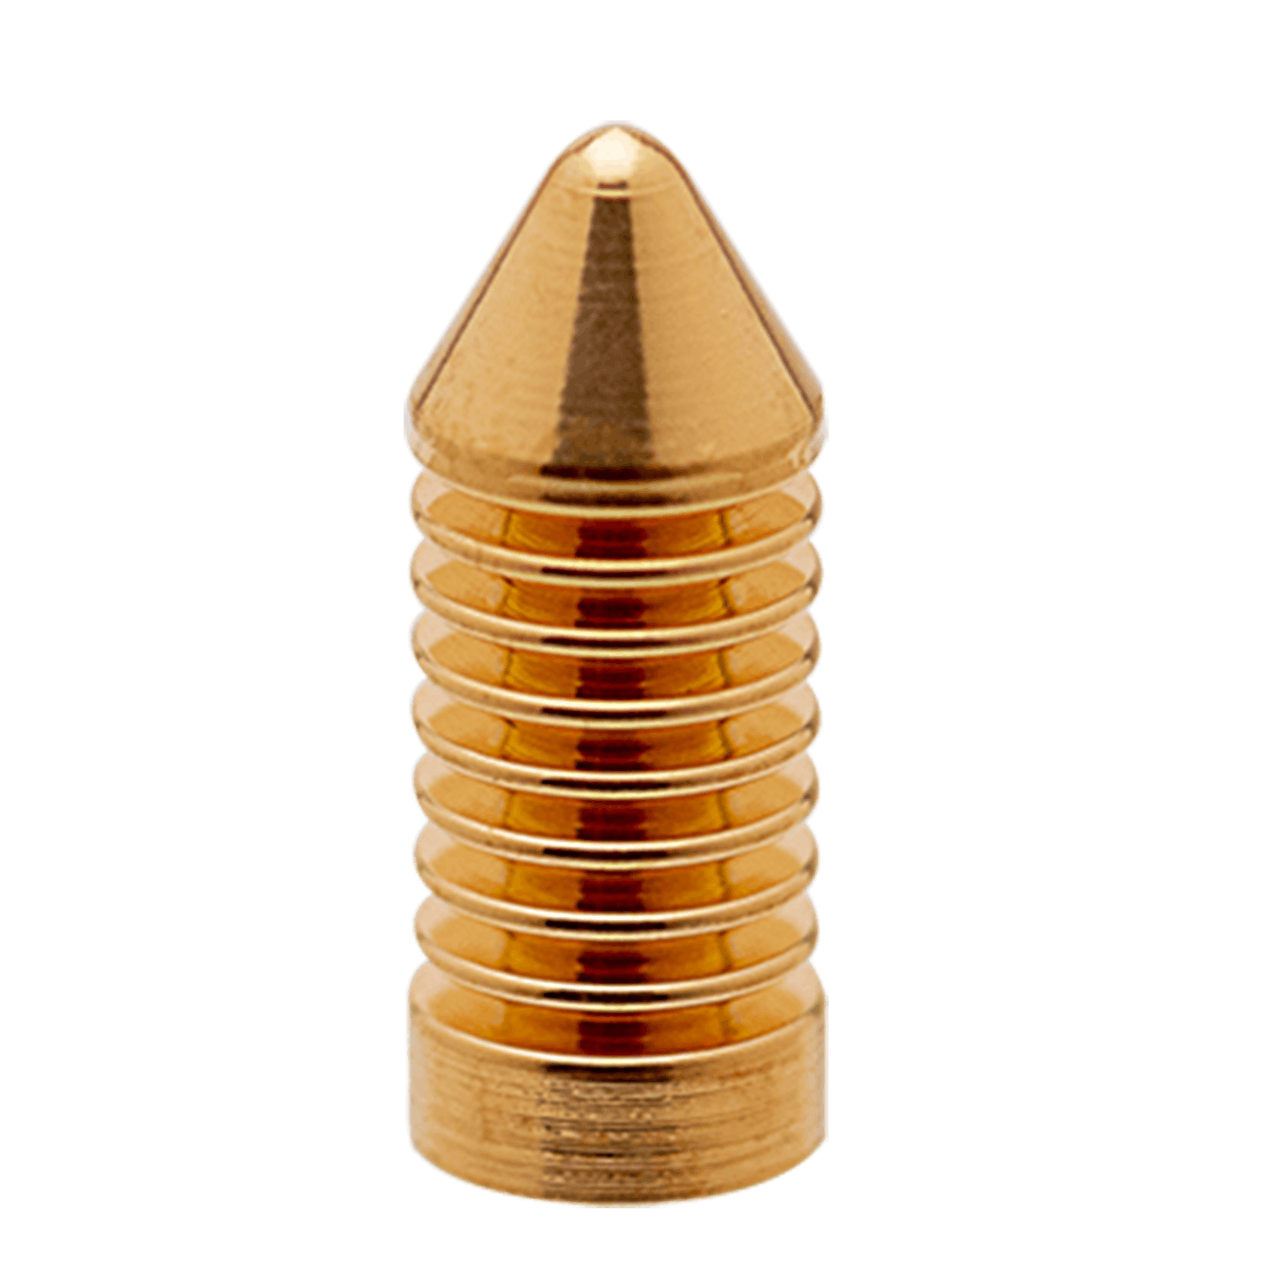 Gold plated electrical contact - interconnect